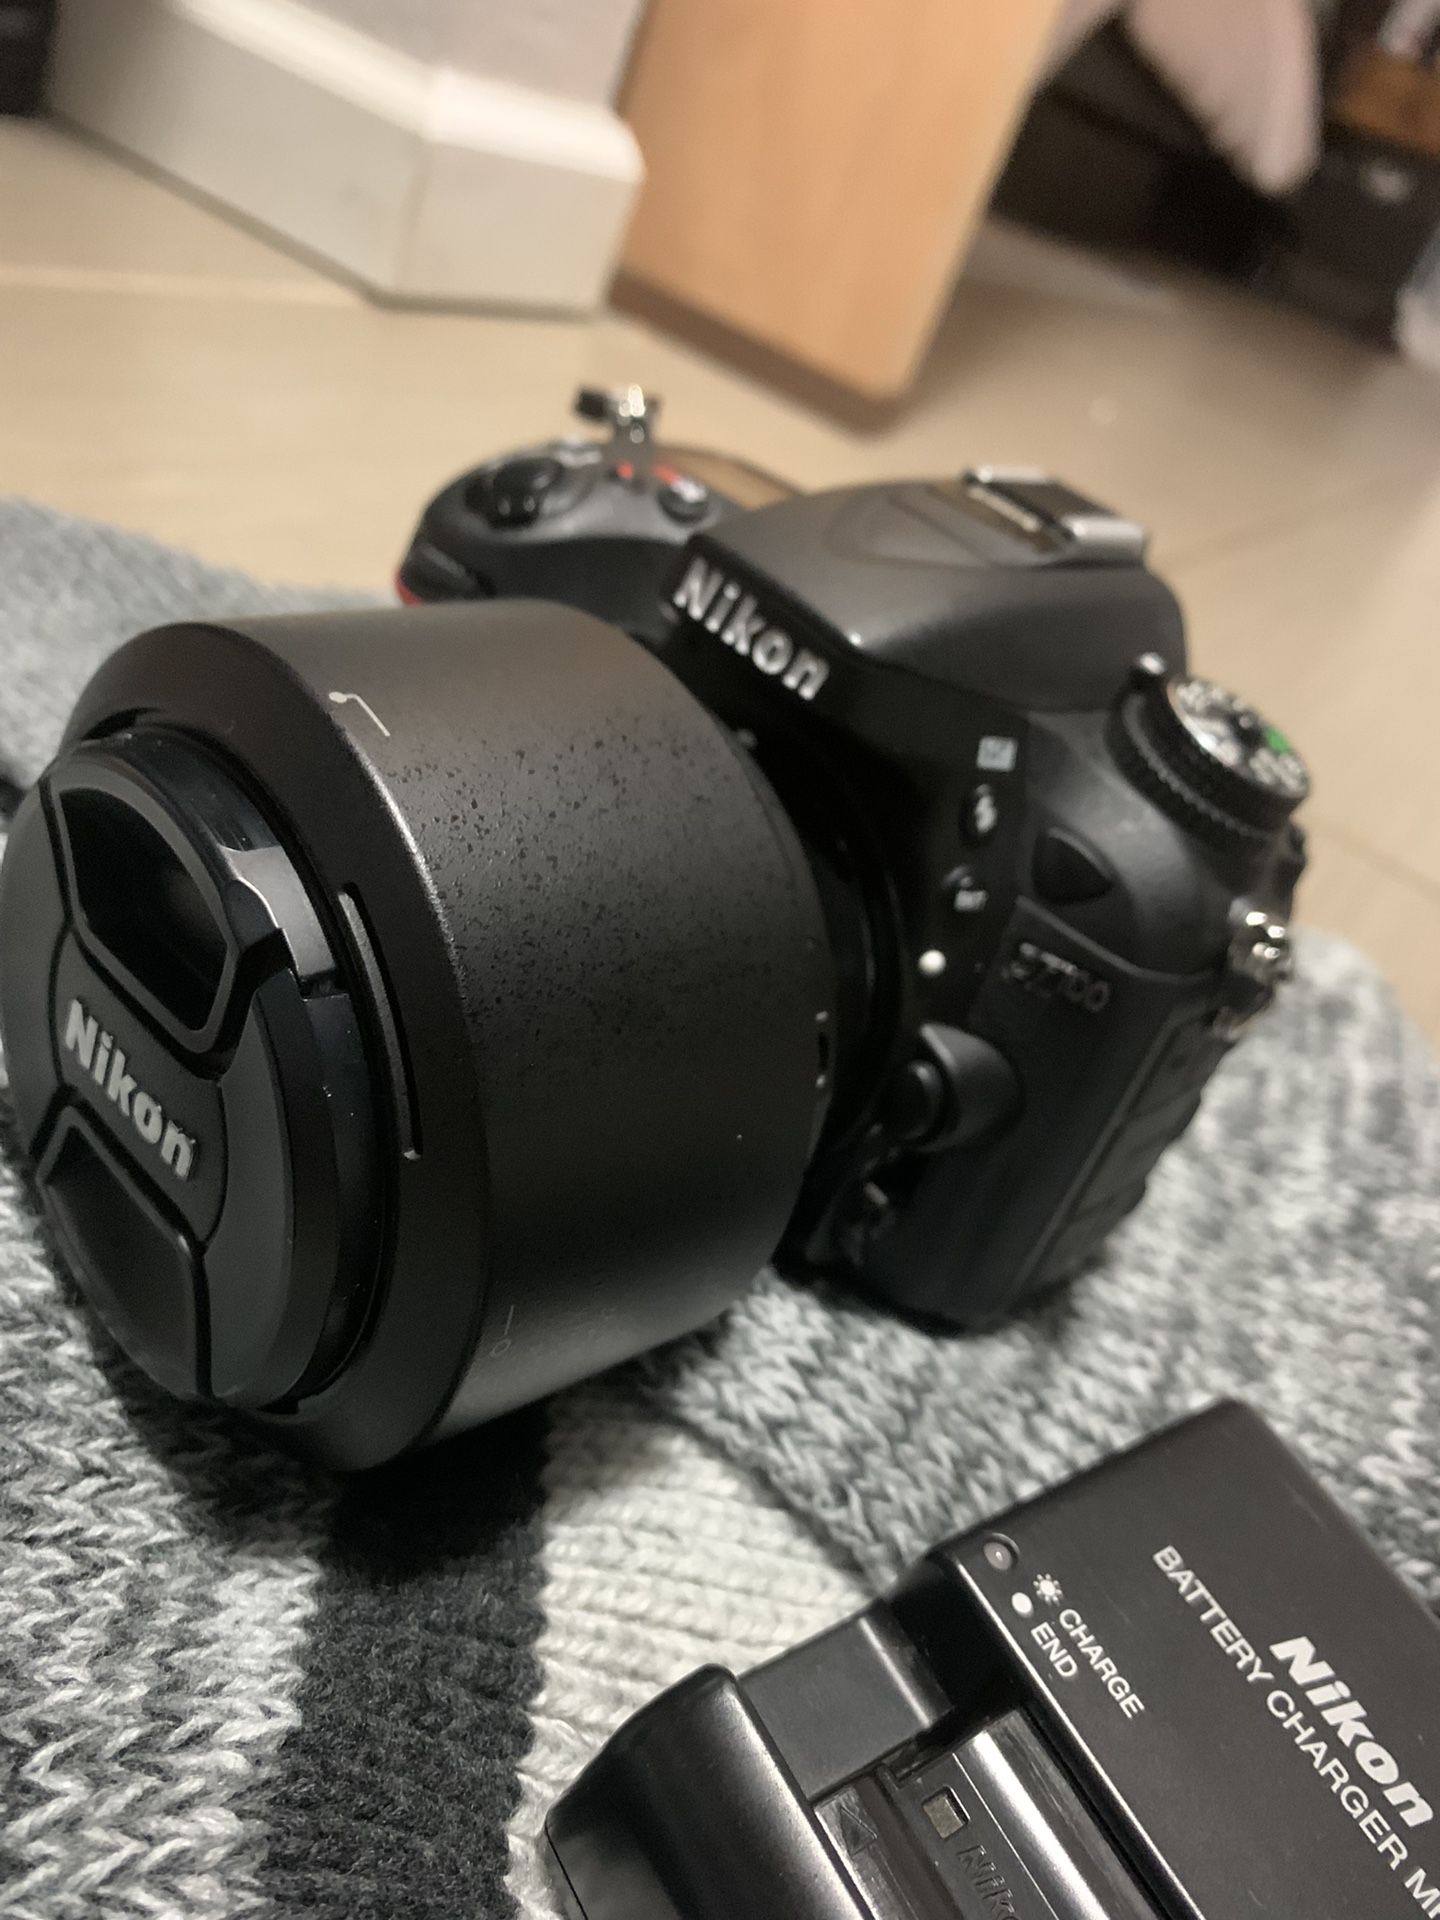 Nikon D7100 And Extras 